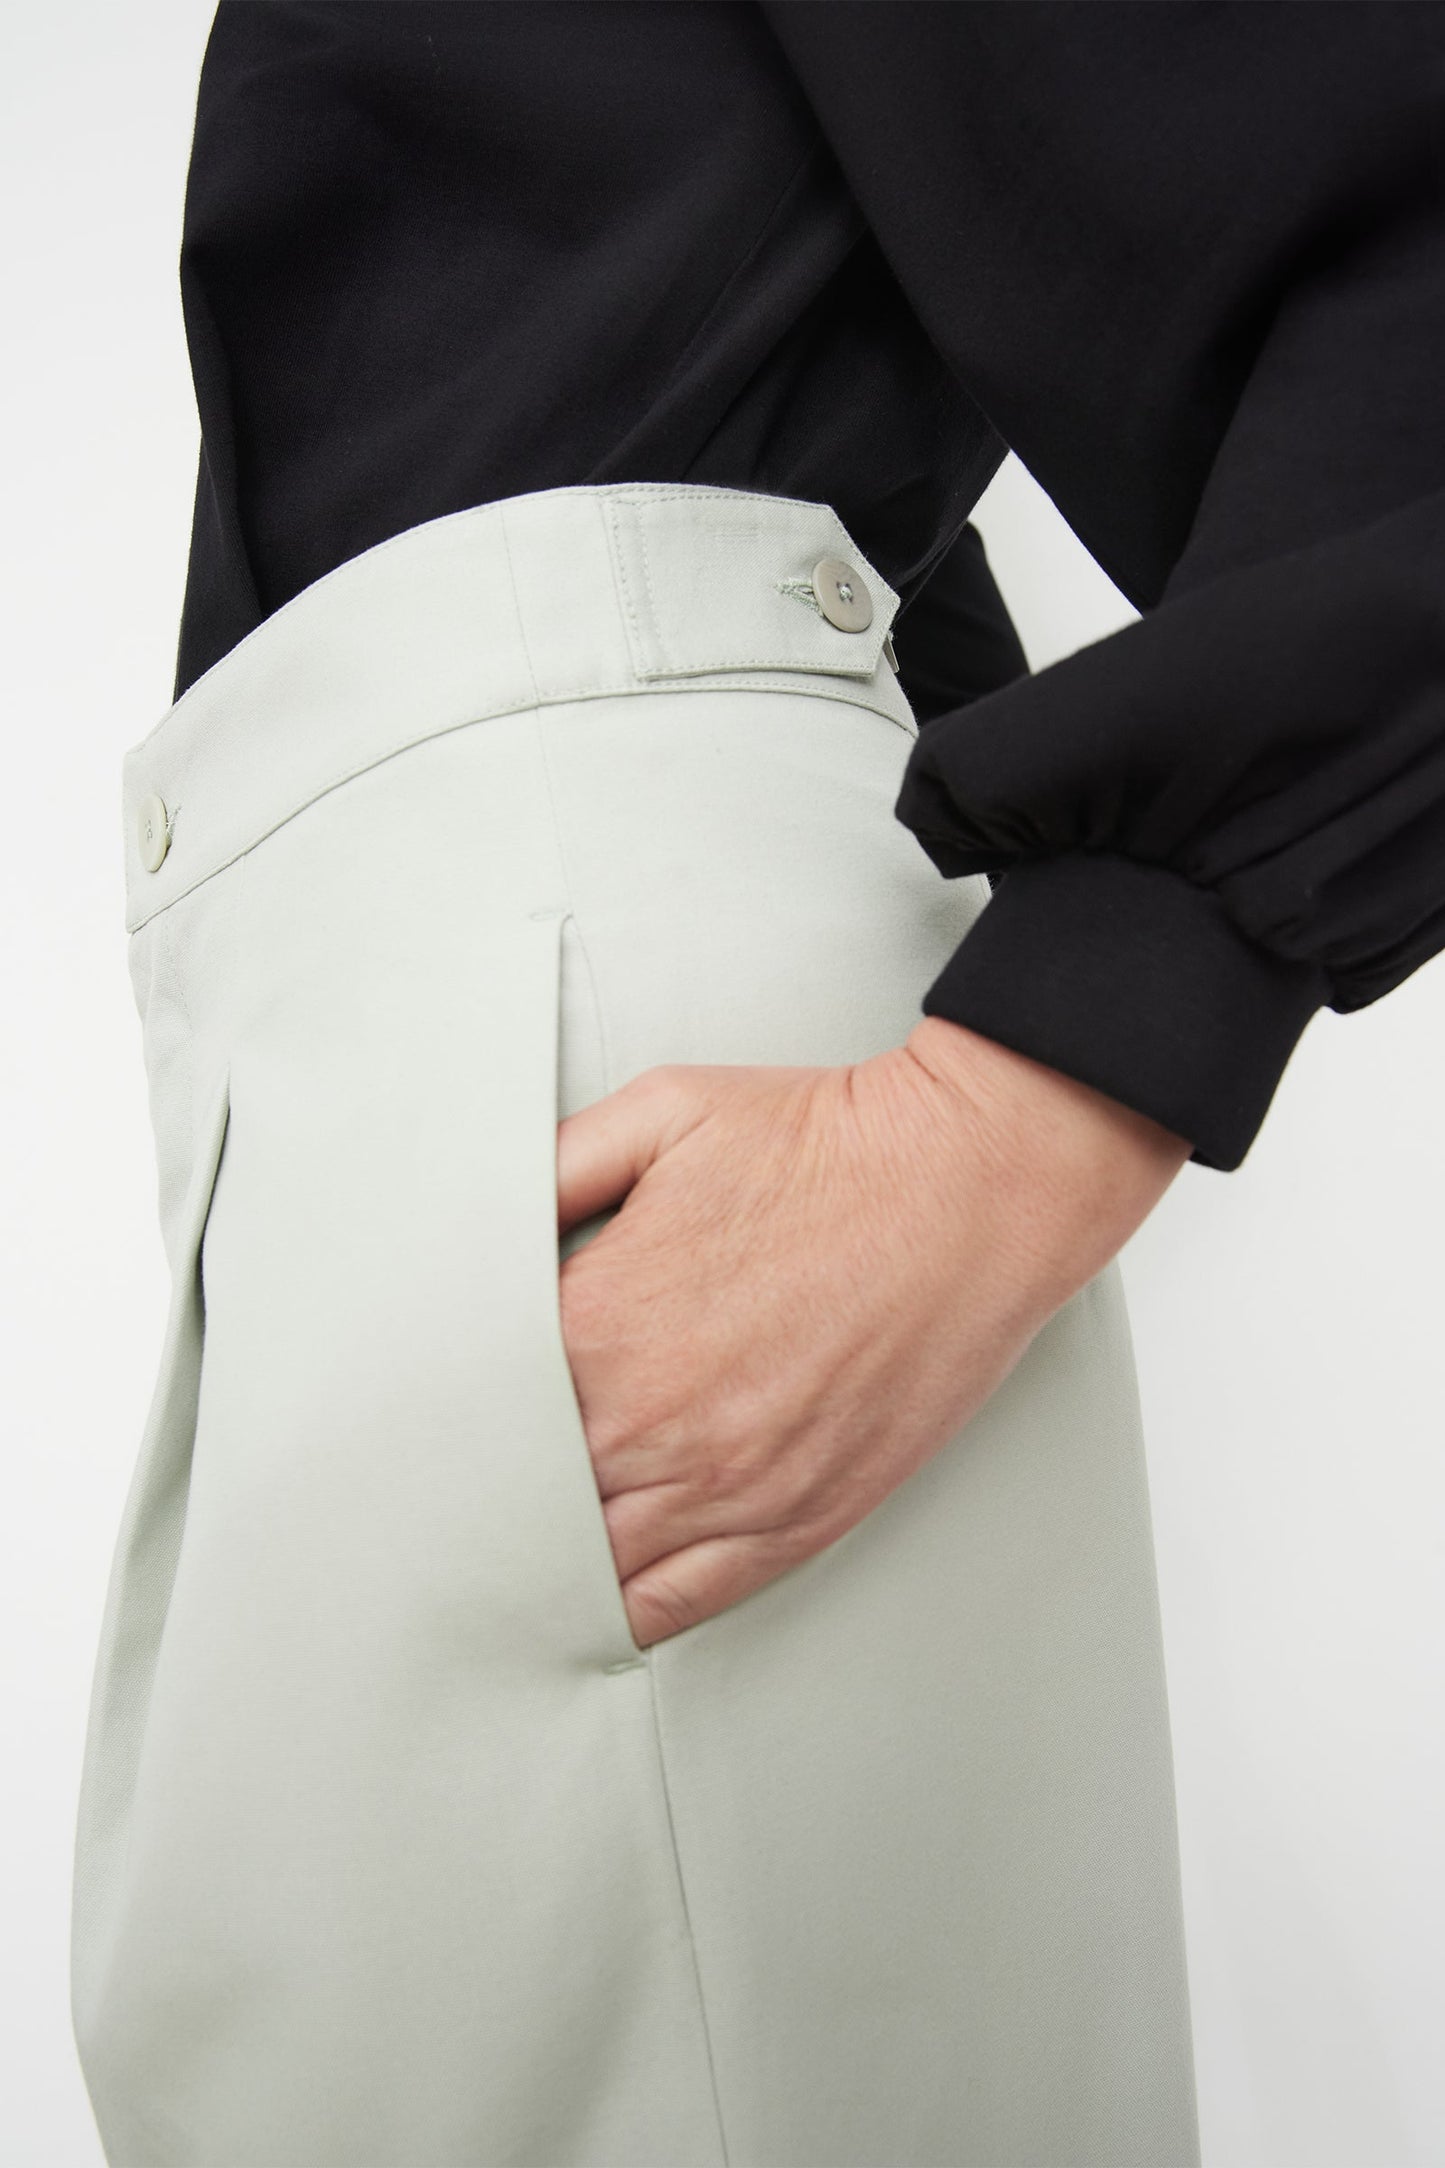 Silhouette Pant